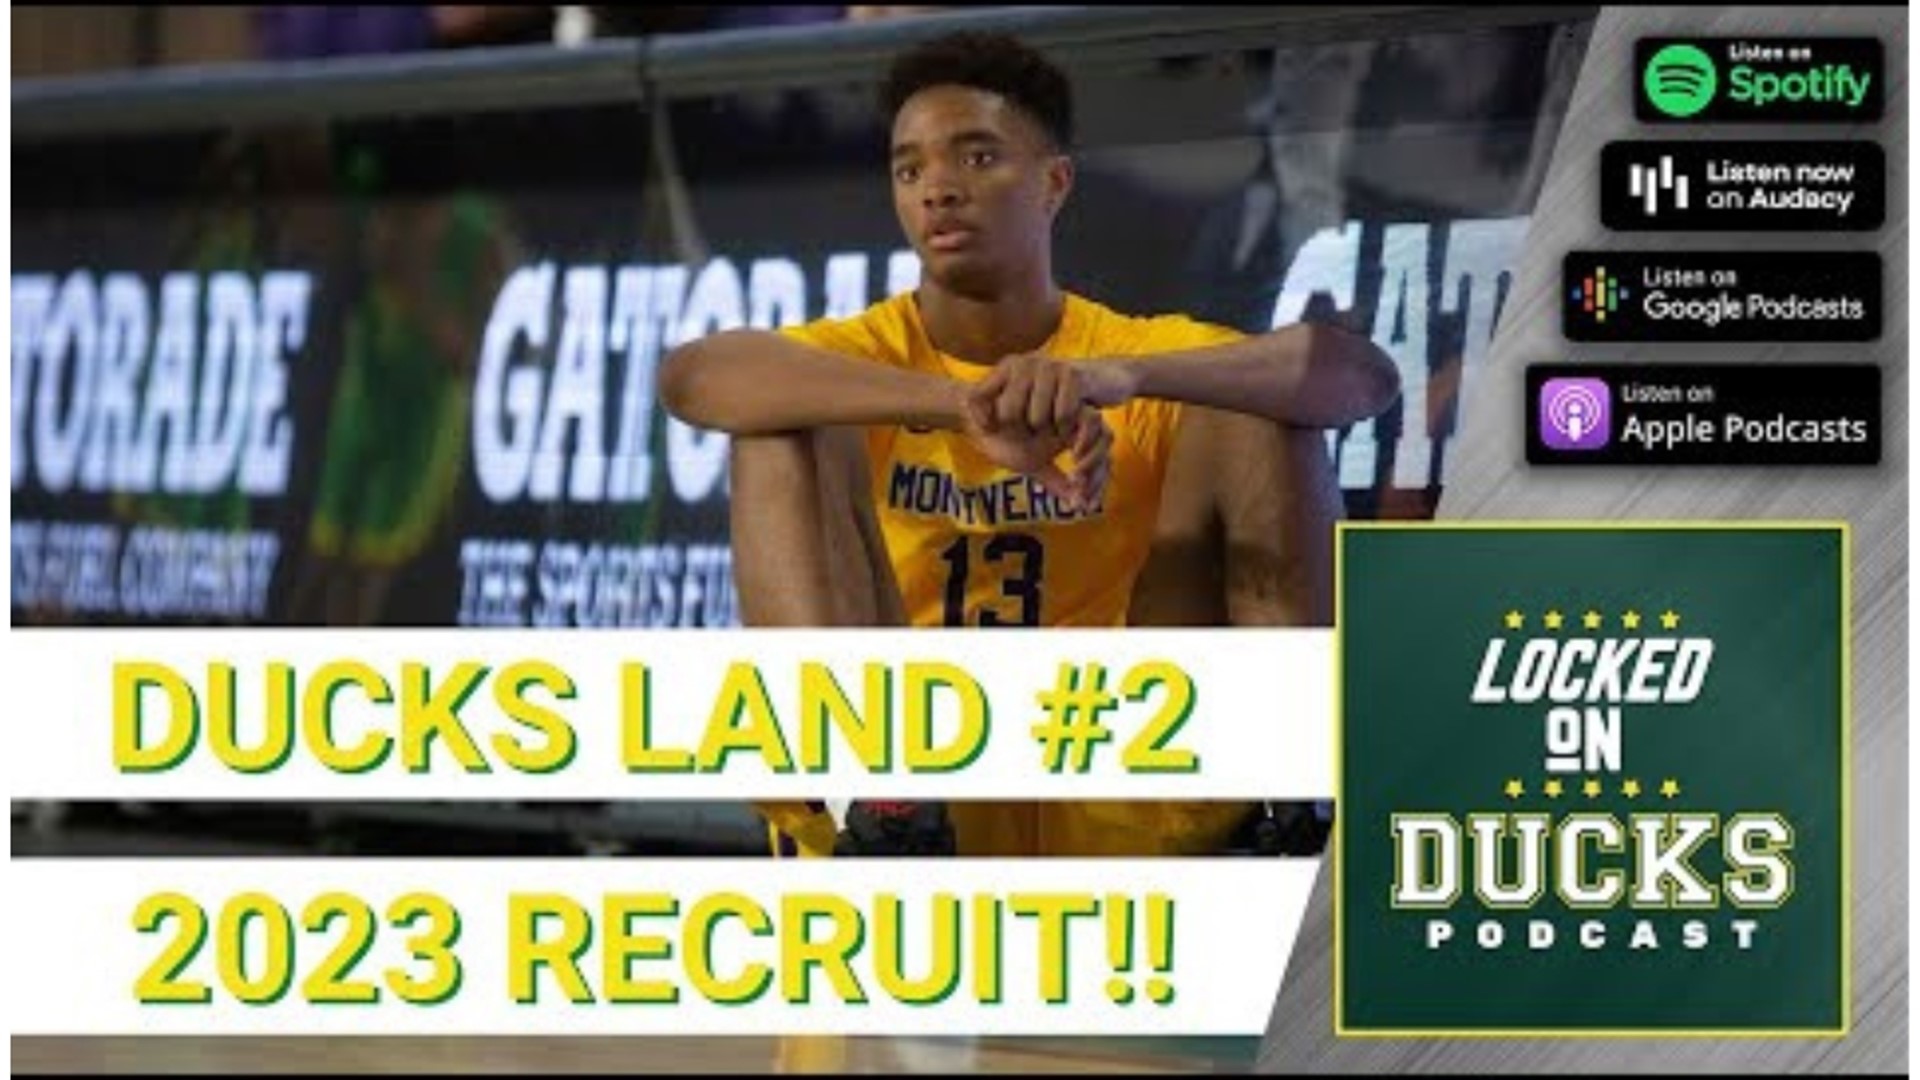 The Oregon Ducks have landed a major verbal commitment from Kwame Evans Jr., the No. 2 player in the ESPN 300.